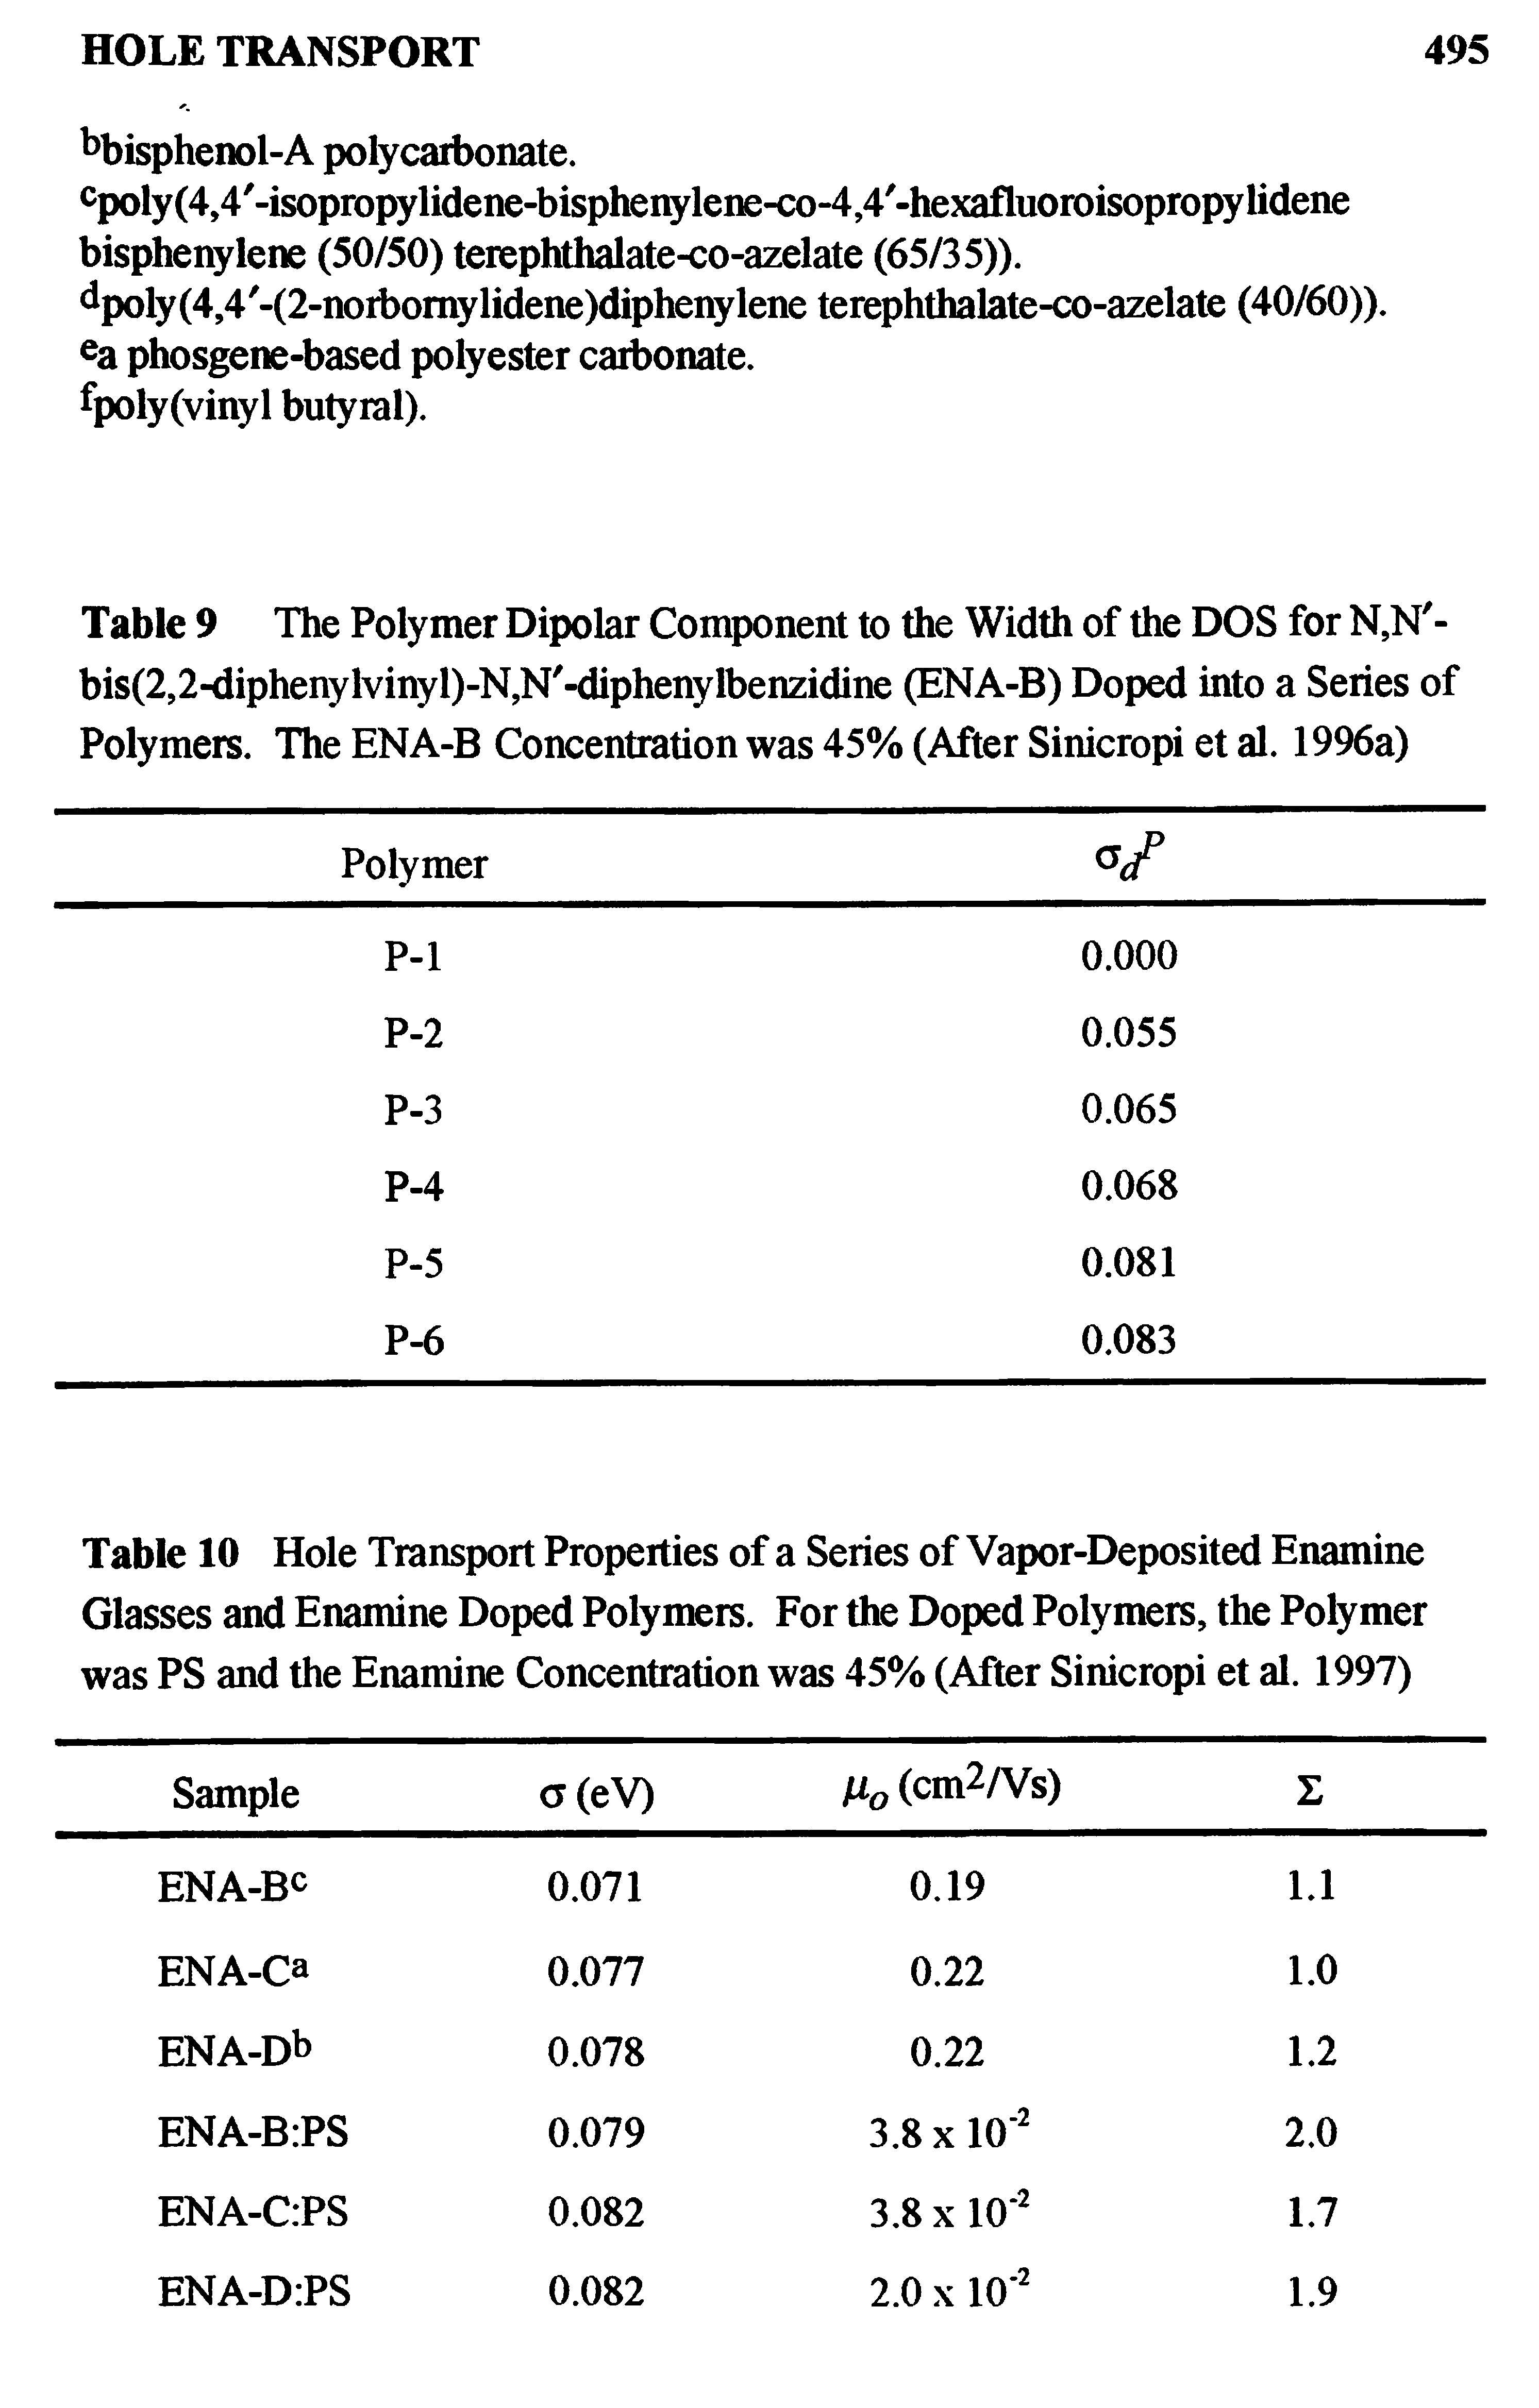 Table 10 Hole Transport Properties of a Series of Vapor-Deposited Enamine Glasses and Enamine Doped Polymers. For the Doped Polymers, the Polymer was PS and the Enamine Concentration was 45% (After Sinicropi et al. 1997)...